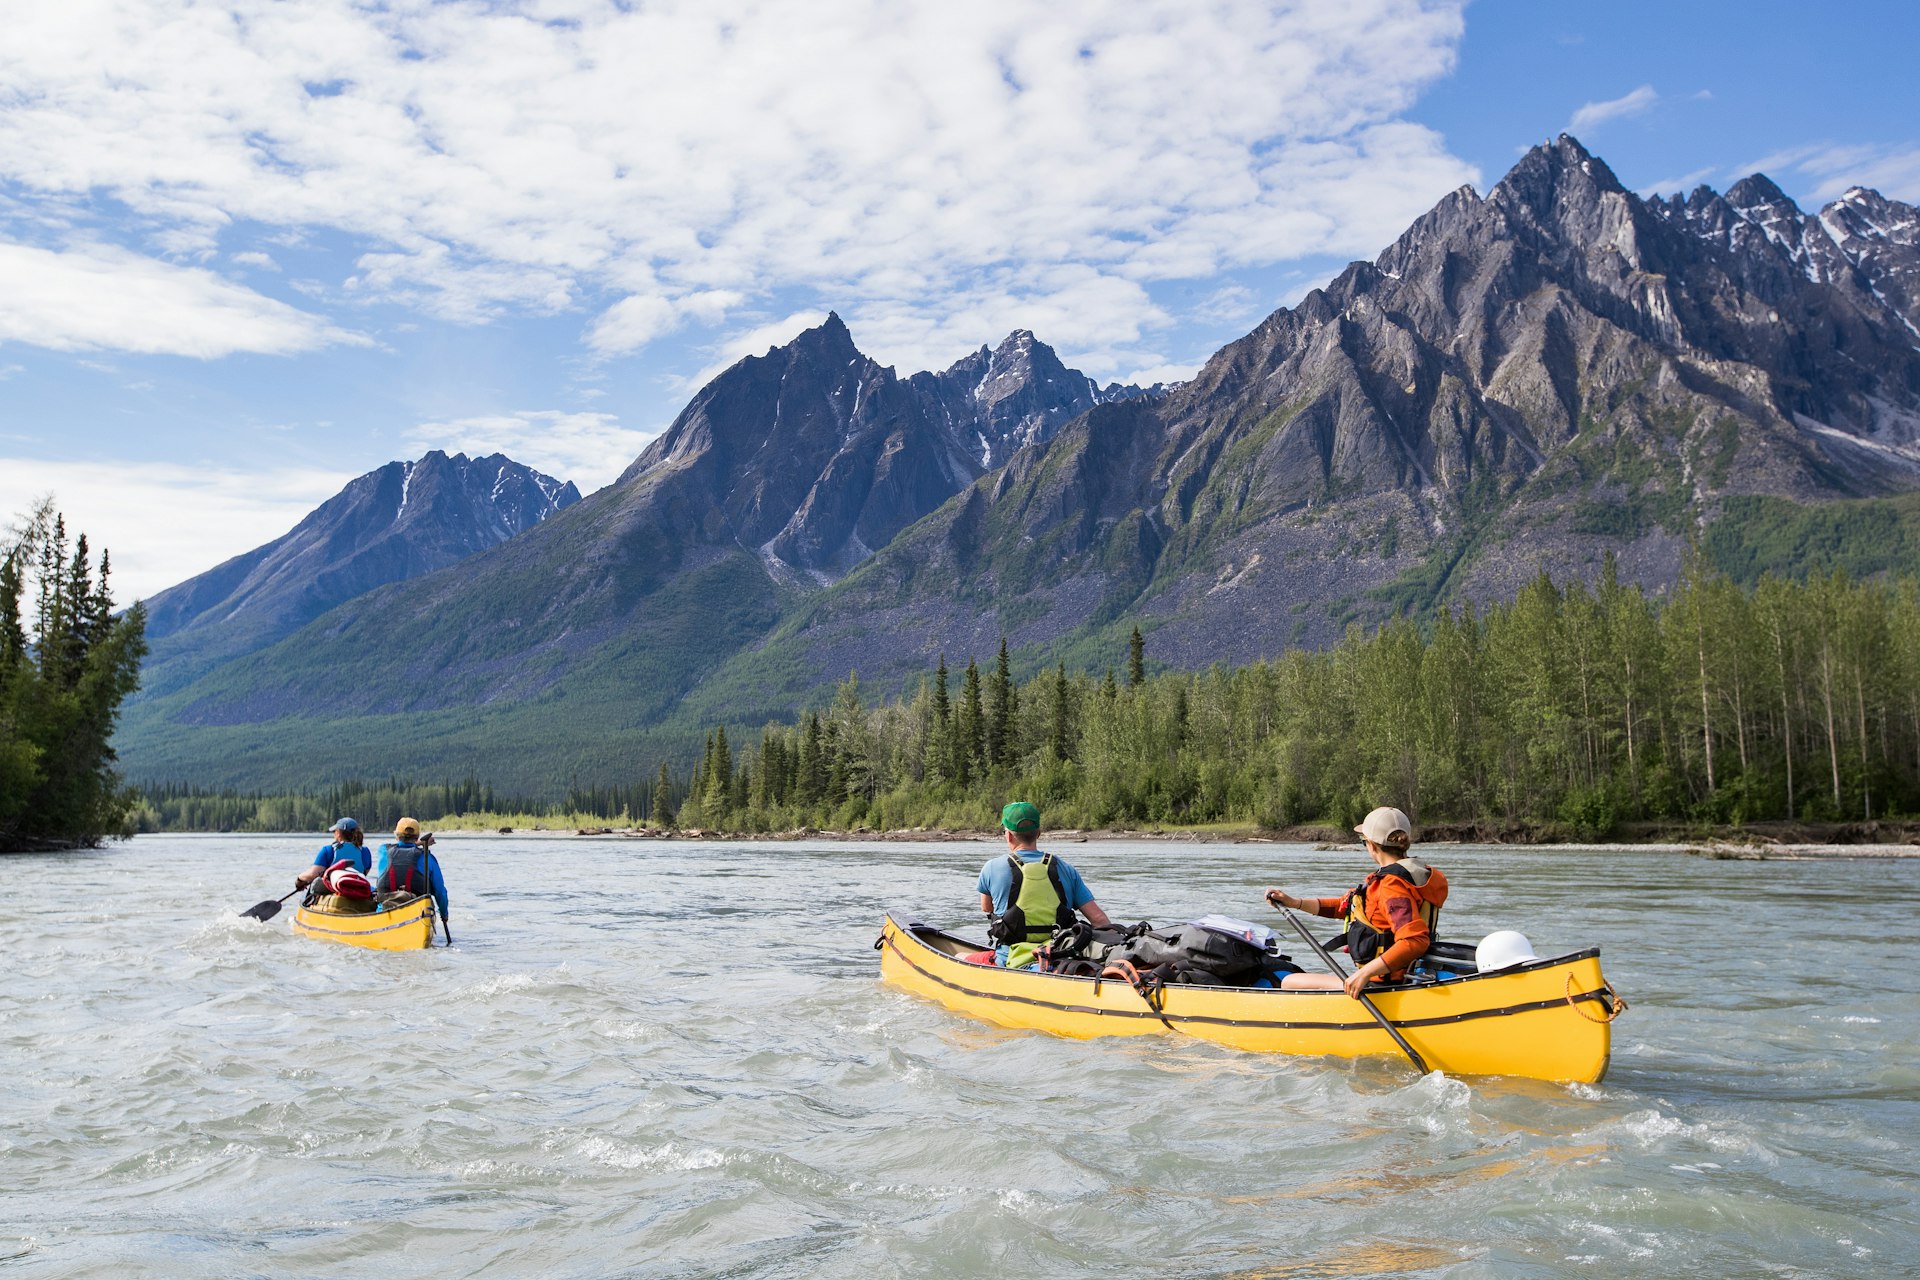 People in two canoes paddle down a river in a mountainous region